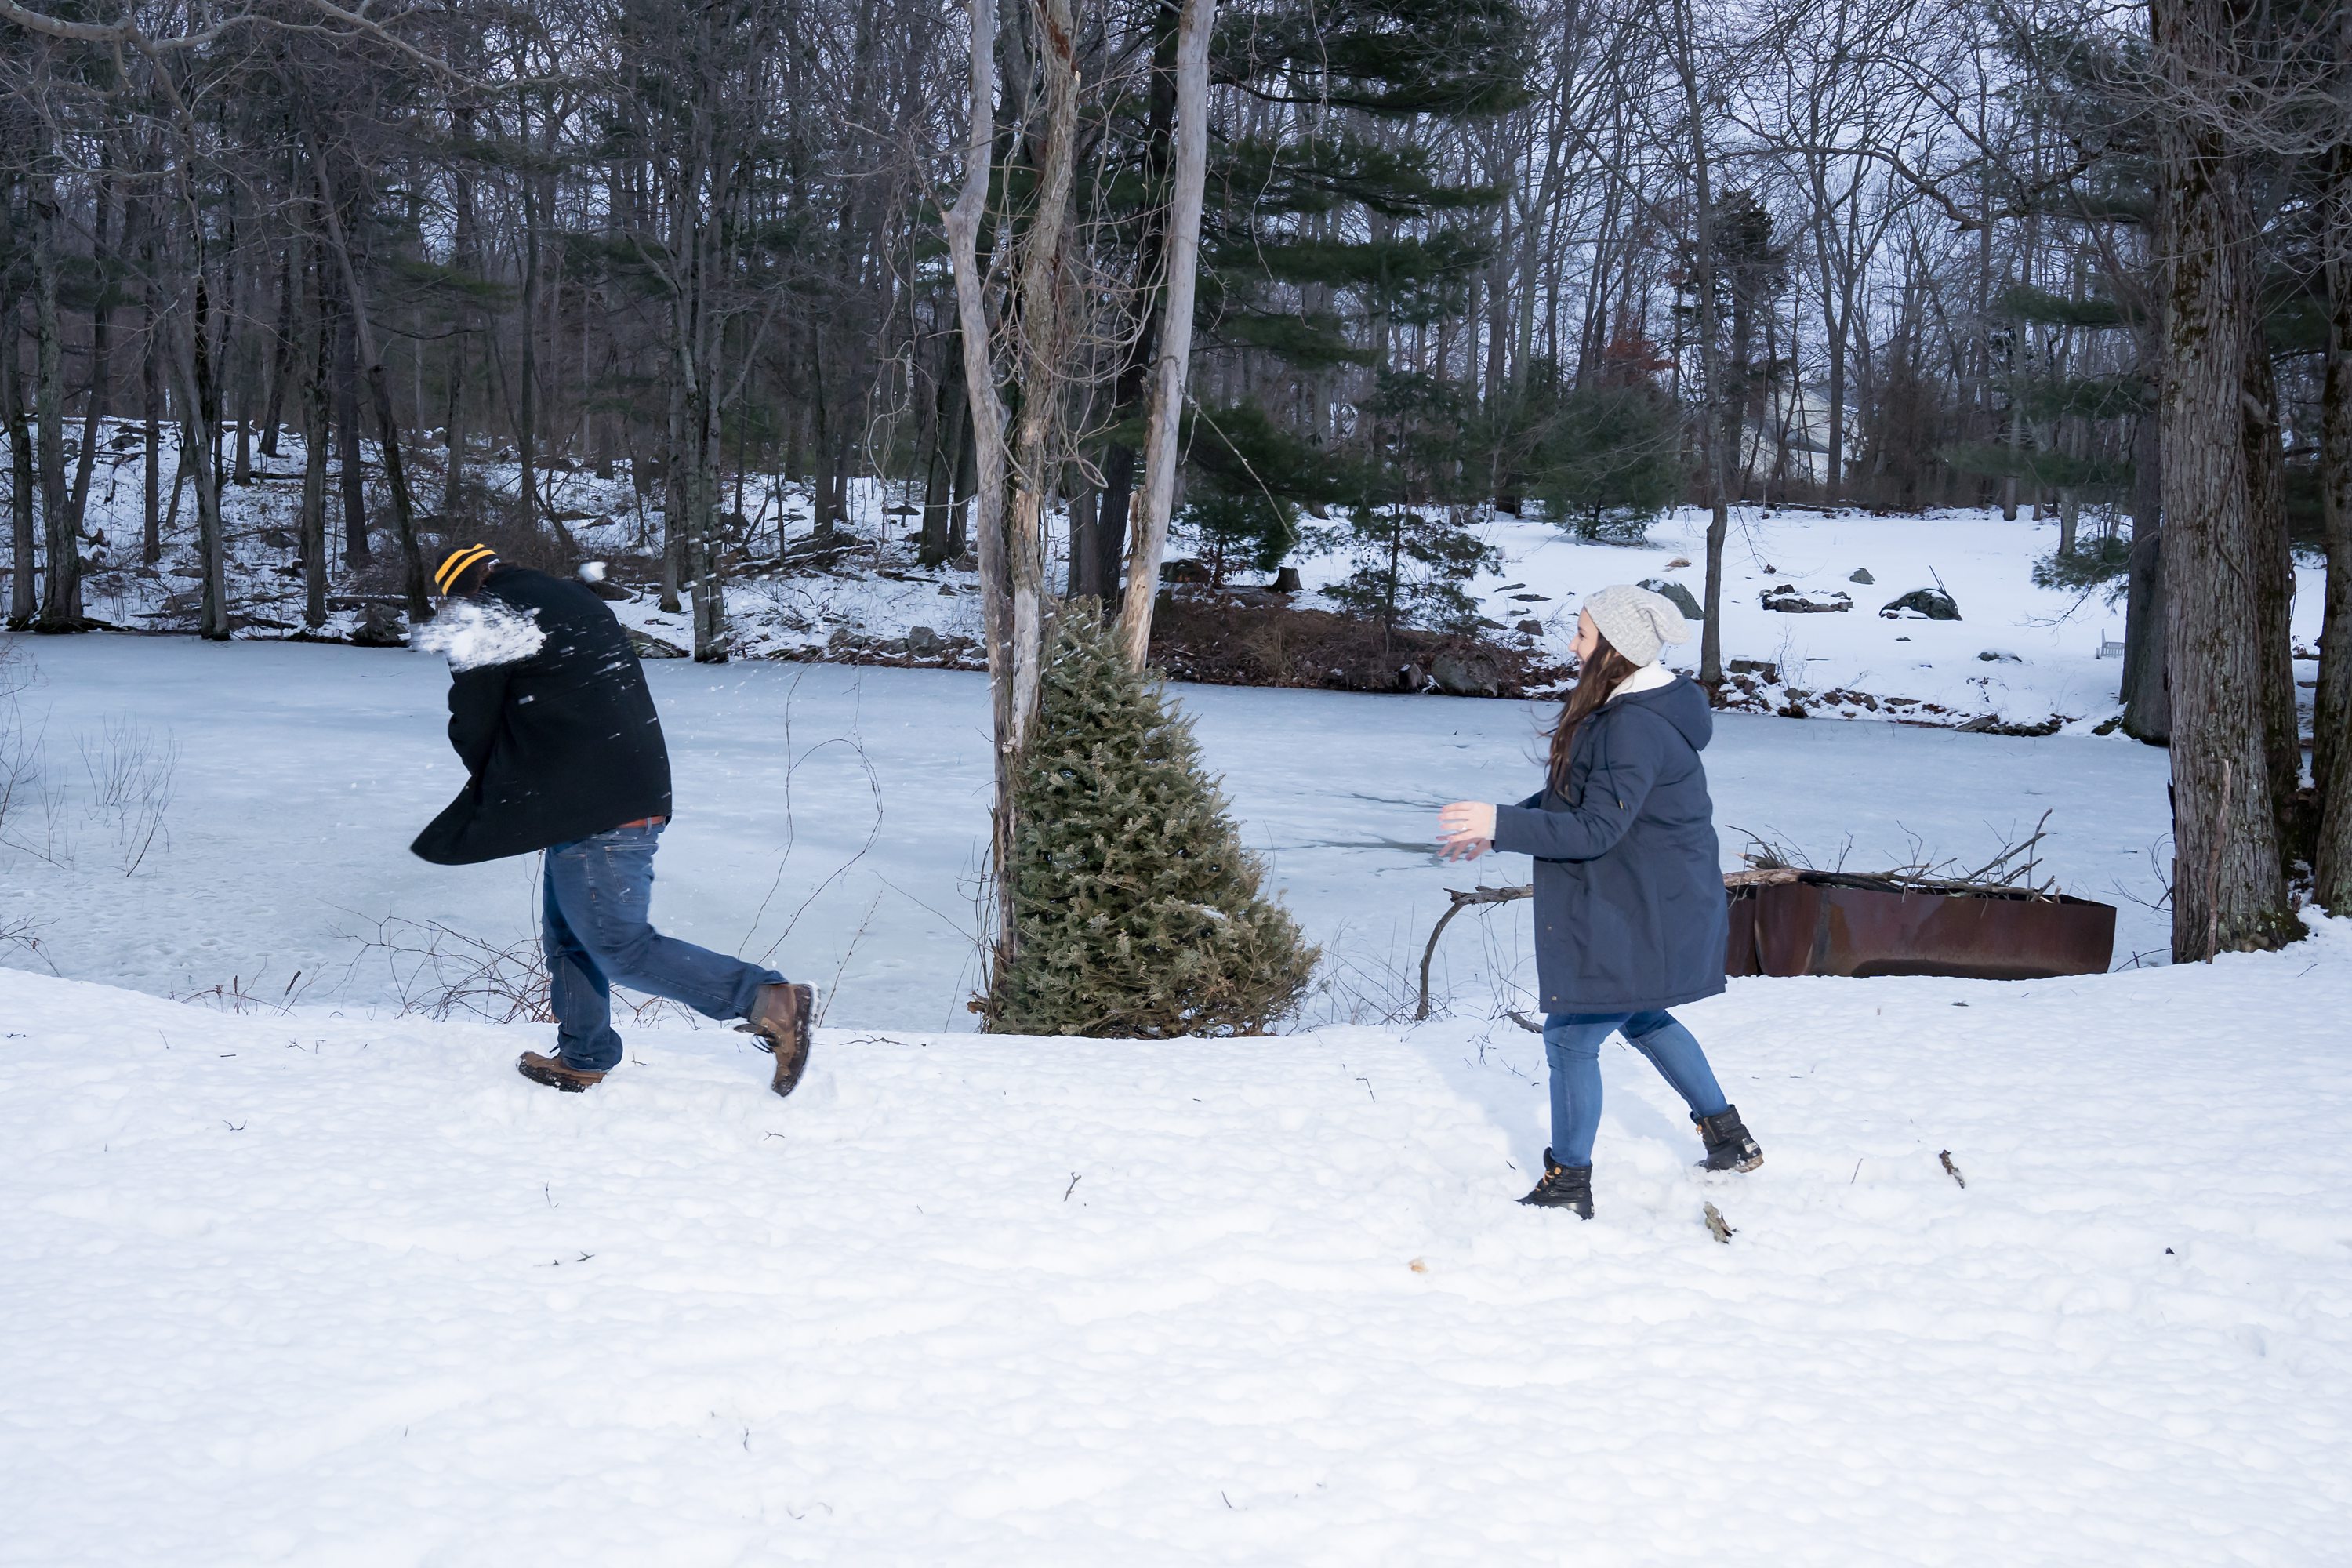 Wrentham Wedding Photographer,Maureen Russell Photography,Snowball Fight at Engagement Session,Snowy Engagement Session,Winter Engagement Session,South Shore Engagement Photographer,Massachusetts Engagement Photographer